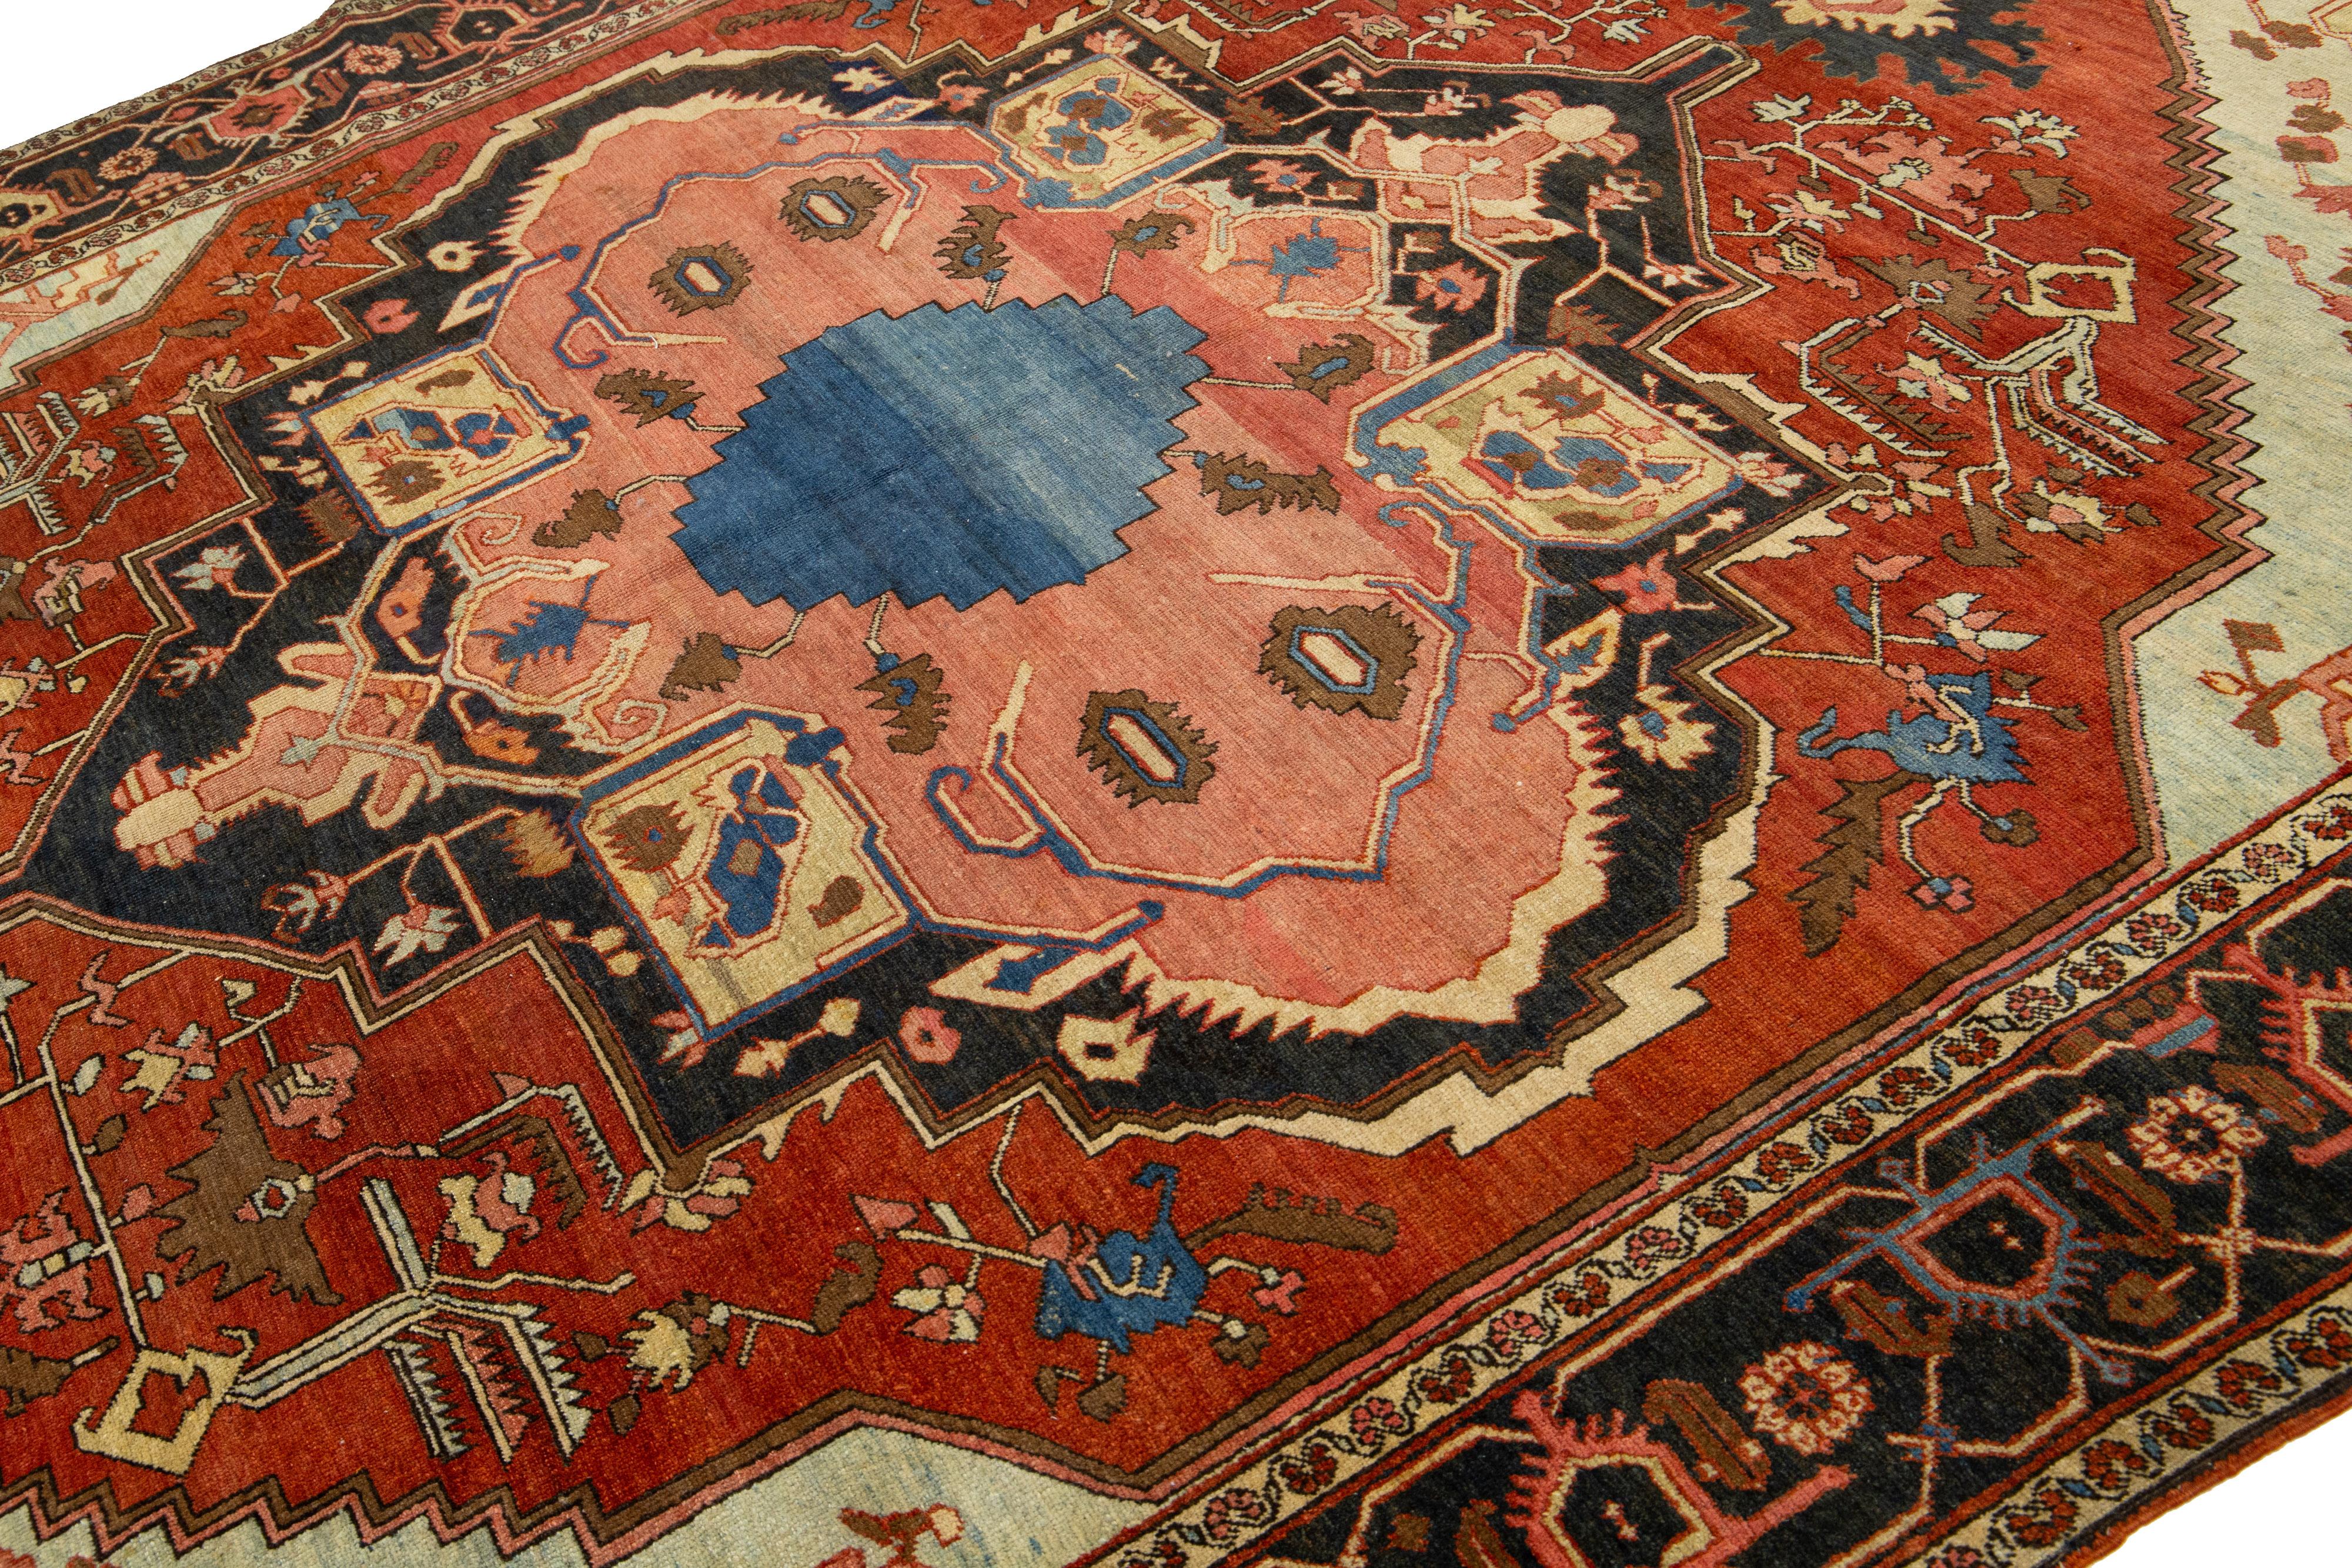 Hand-Knotted 1870s Antique Wool Rug Persian Serapi Featuring a Medallion Motif In Rust Color For Sale